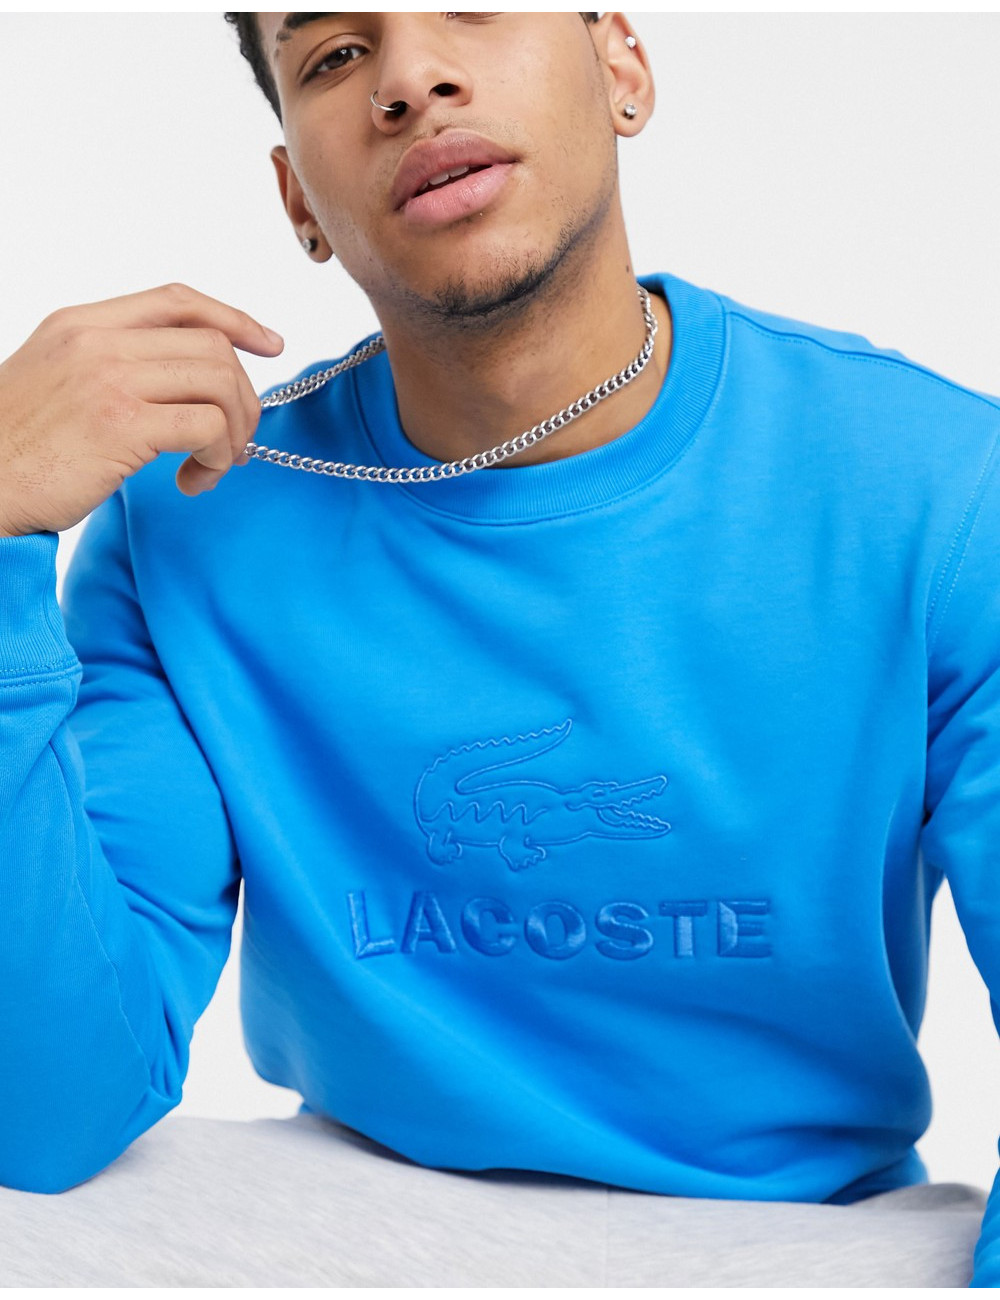 Lacoste embroidered logo...